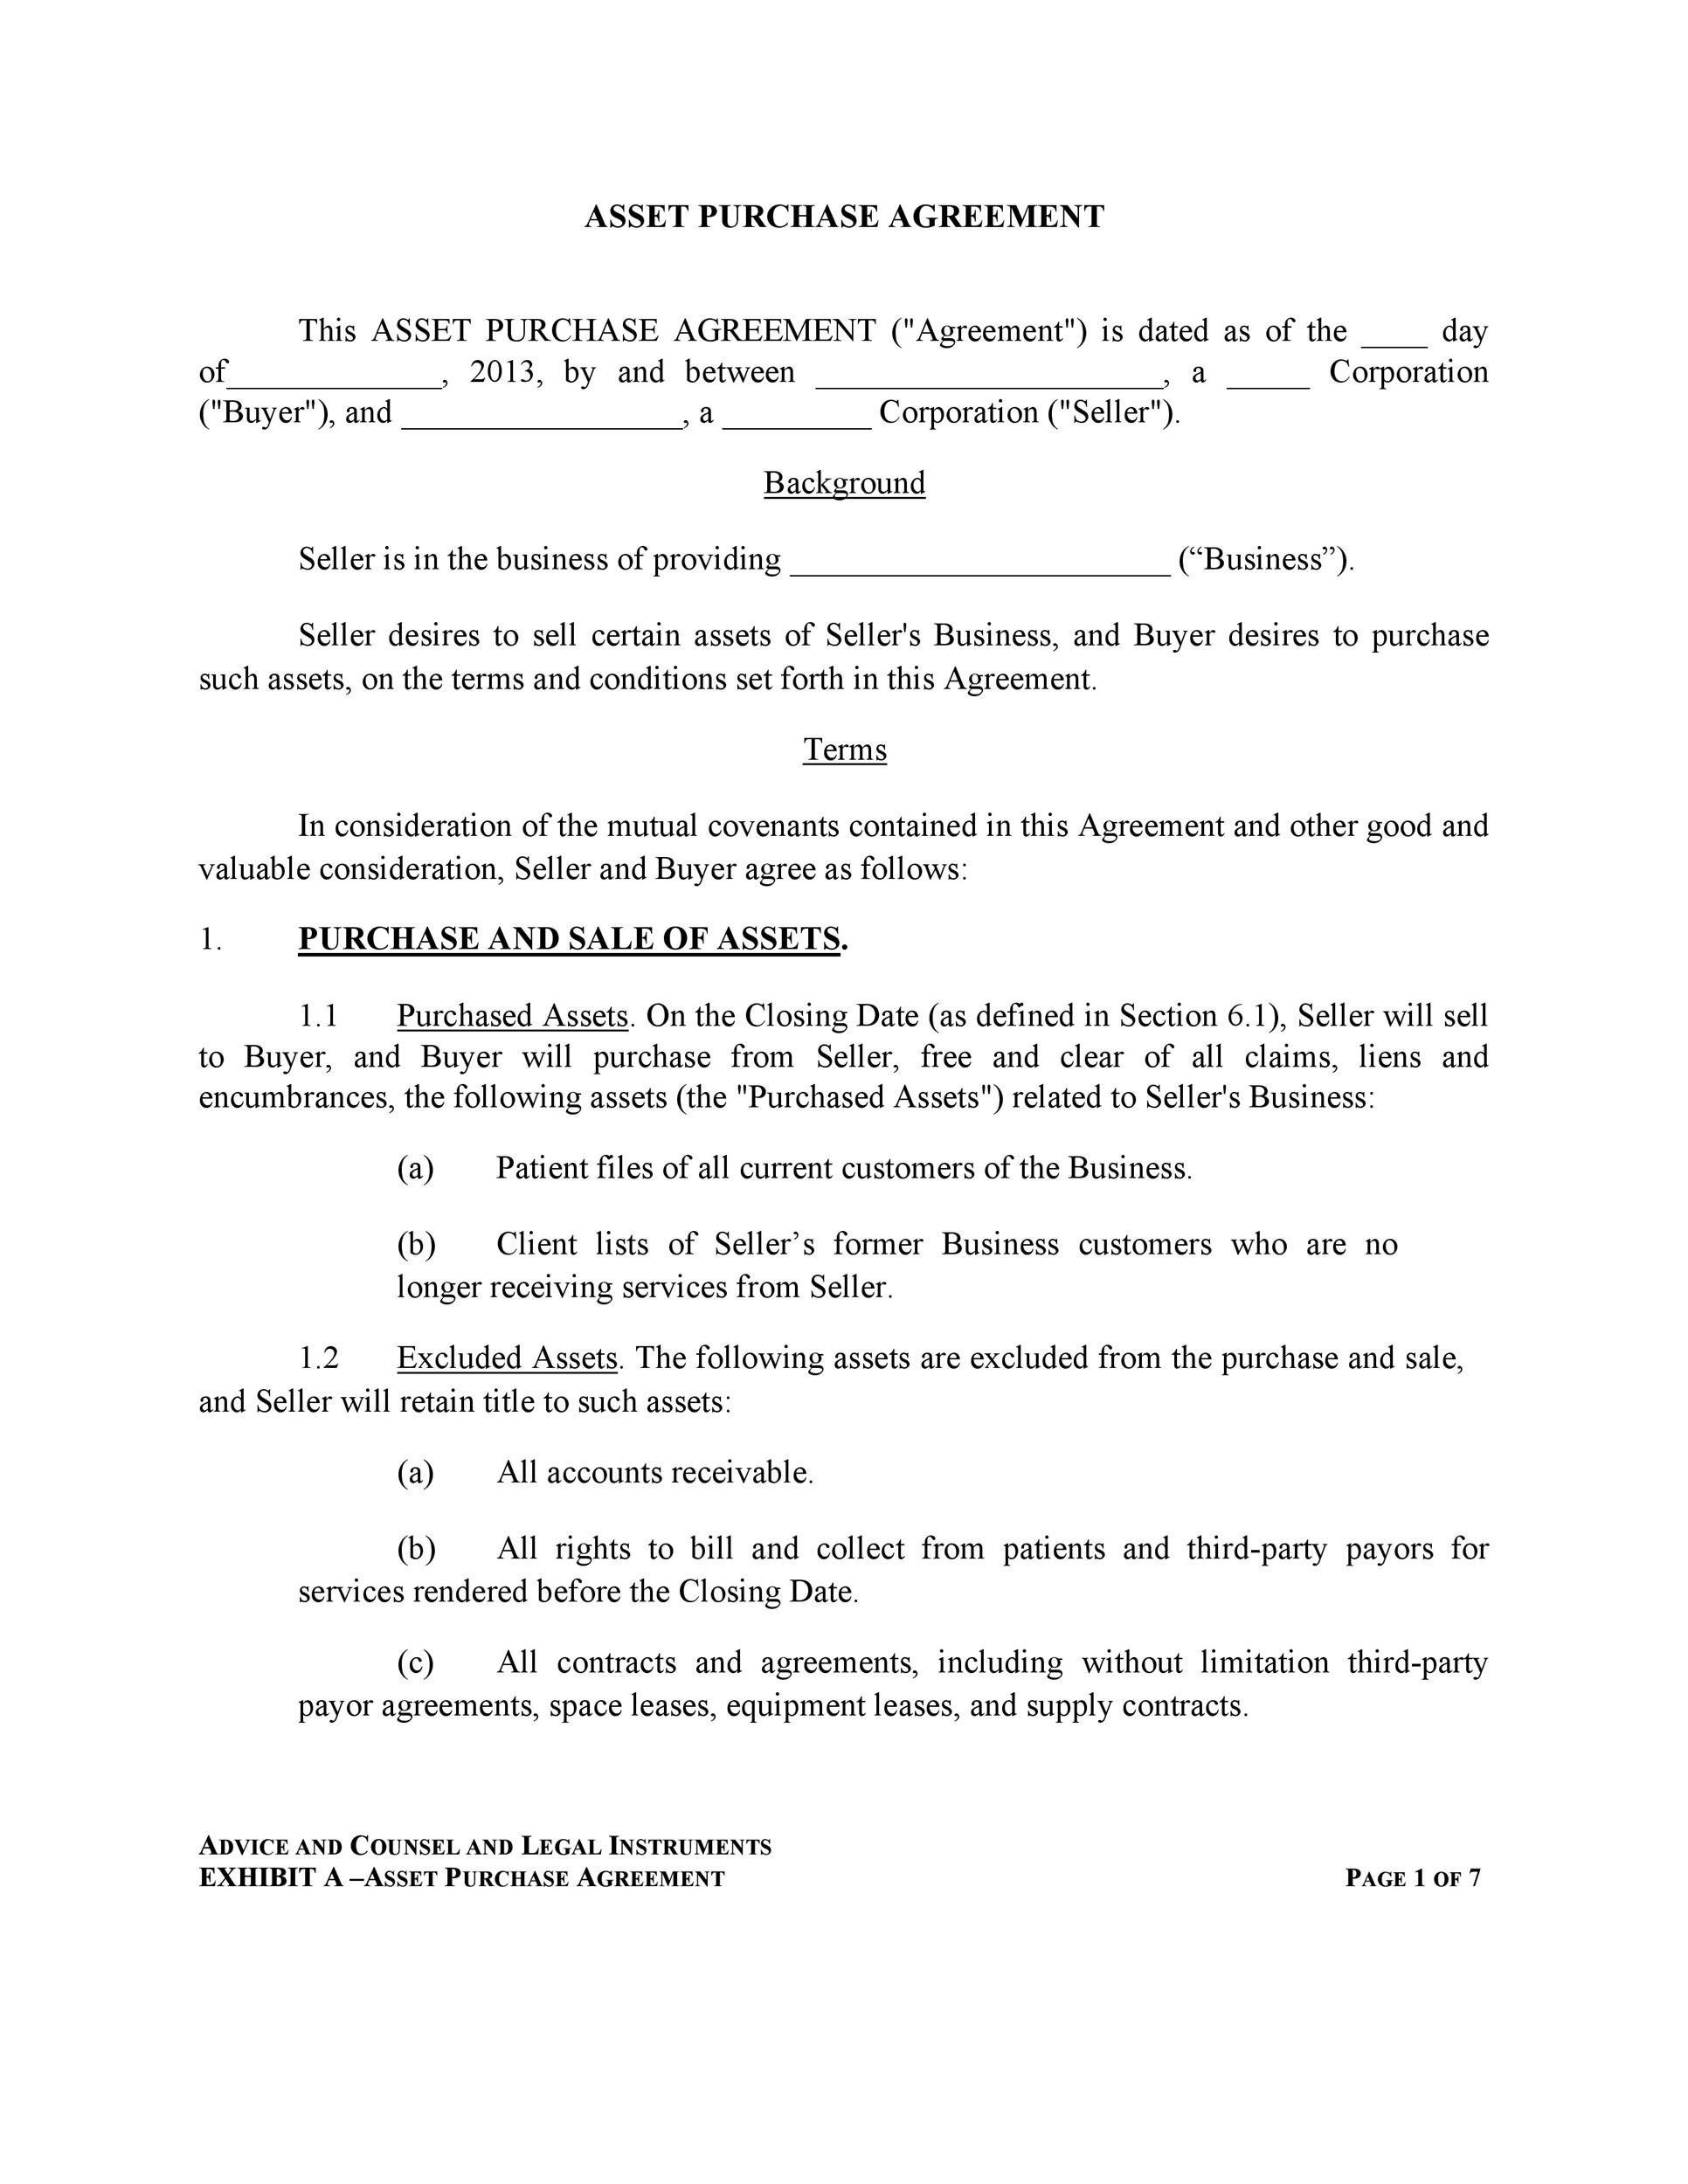 Volume Purchase Agreement Template